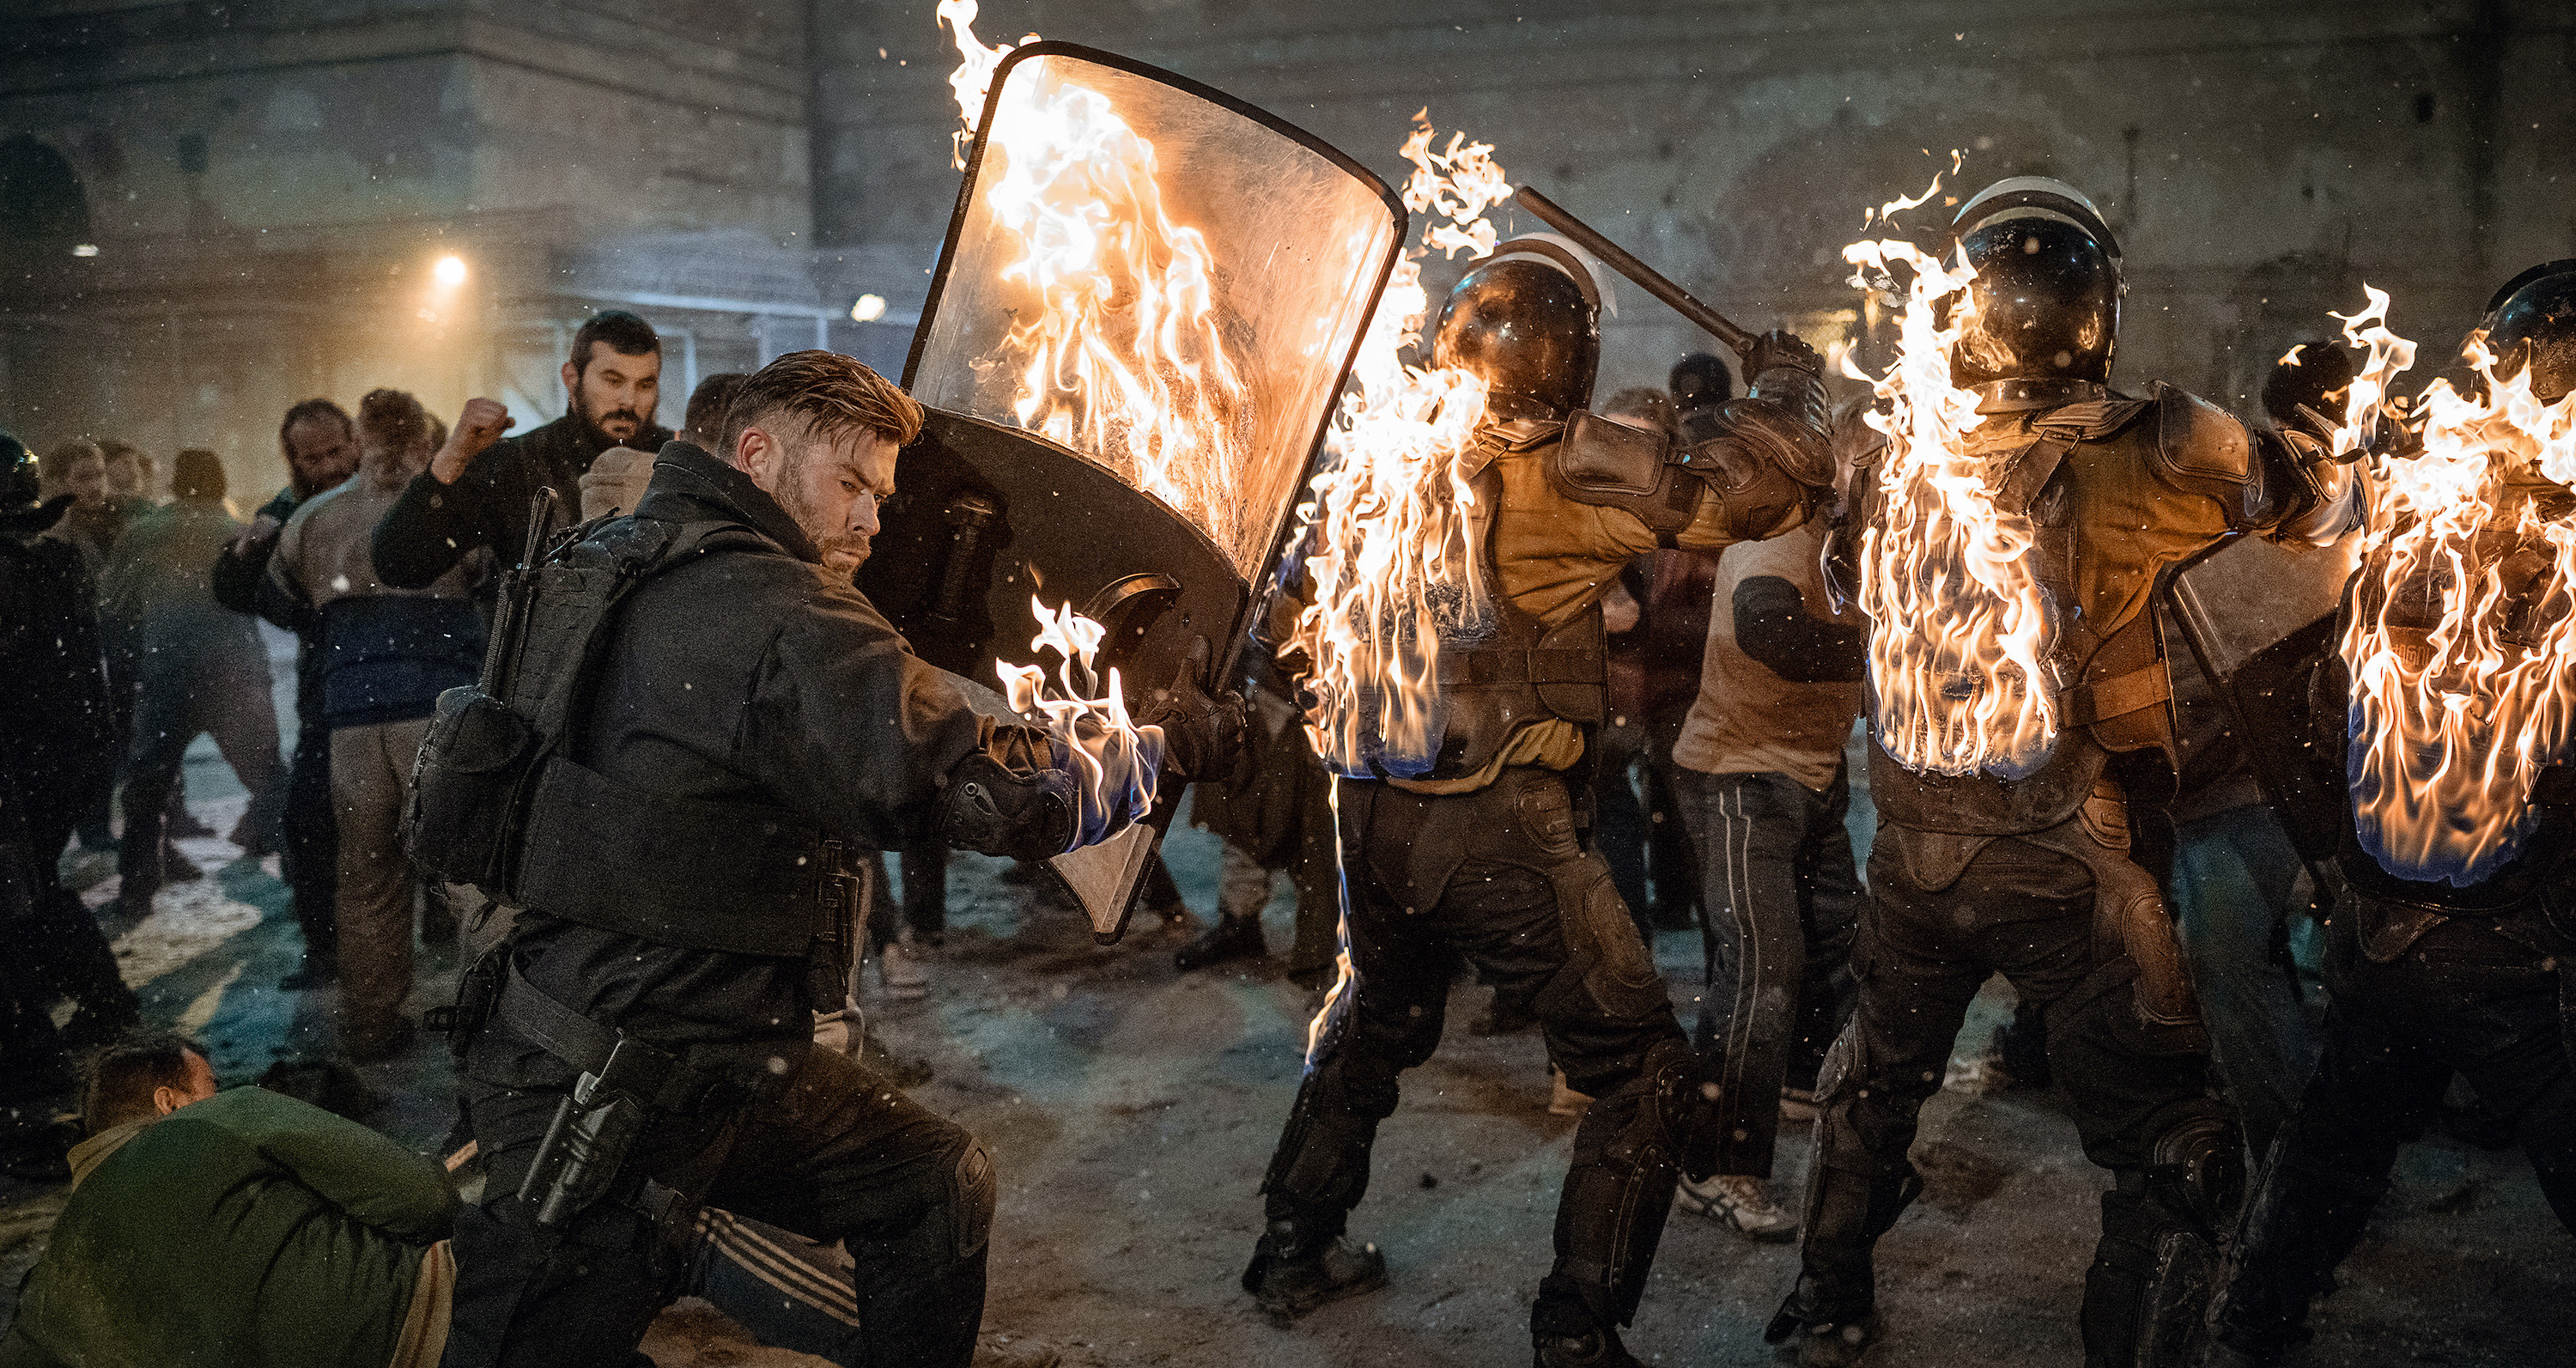 Mercenary Tyler Rake (Chris Hemsworth), with his coat sleeve on fire, charges three armored soldiers holding up riot shields, which are also on fire, in Extraction 2’s astonishing 21-minute handheld action sequence